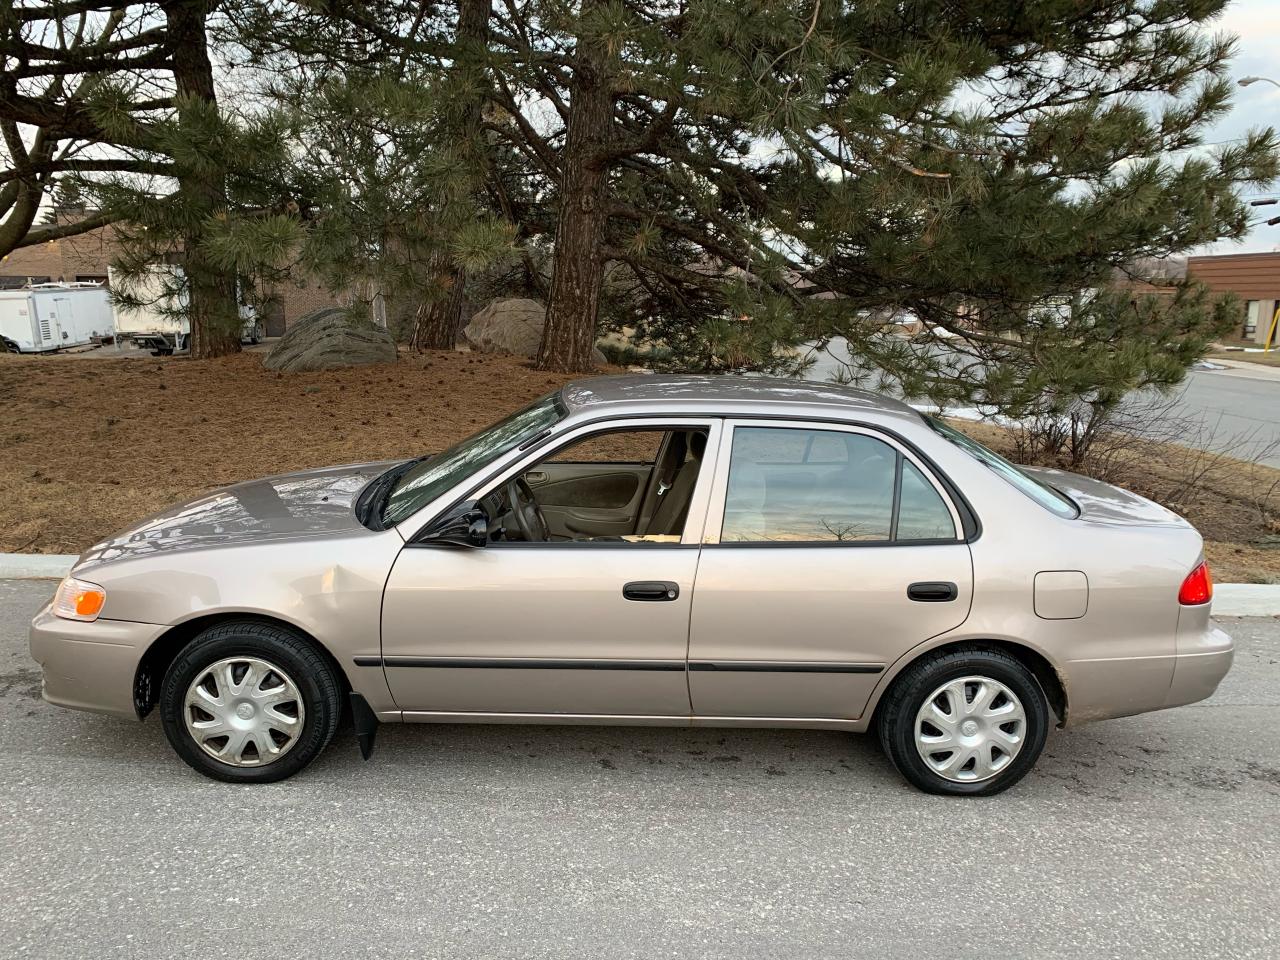 2002 Toyota Corolla CE PLUS-ONLY 162,557KMS! 1 LOCAL OWNER! NO CLAIMS! - Photo #4